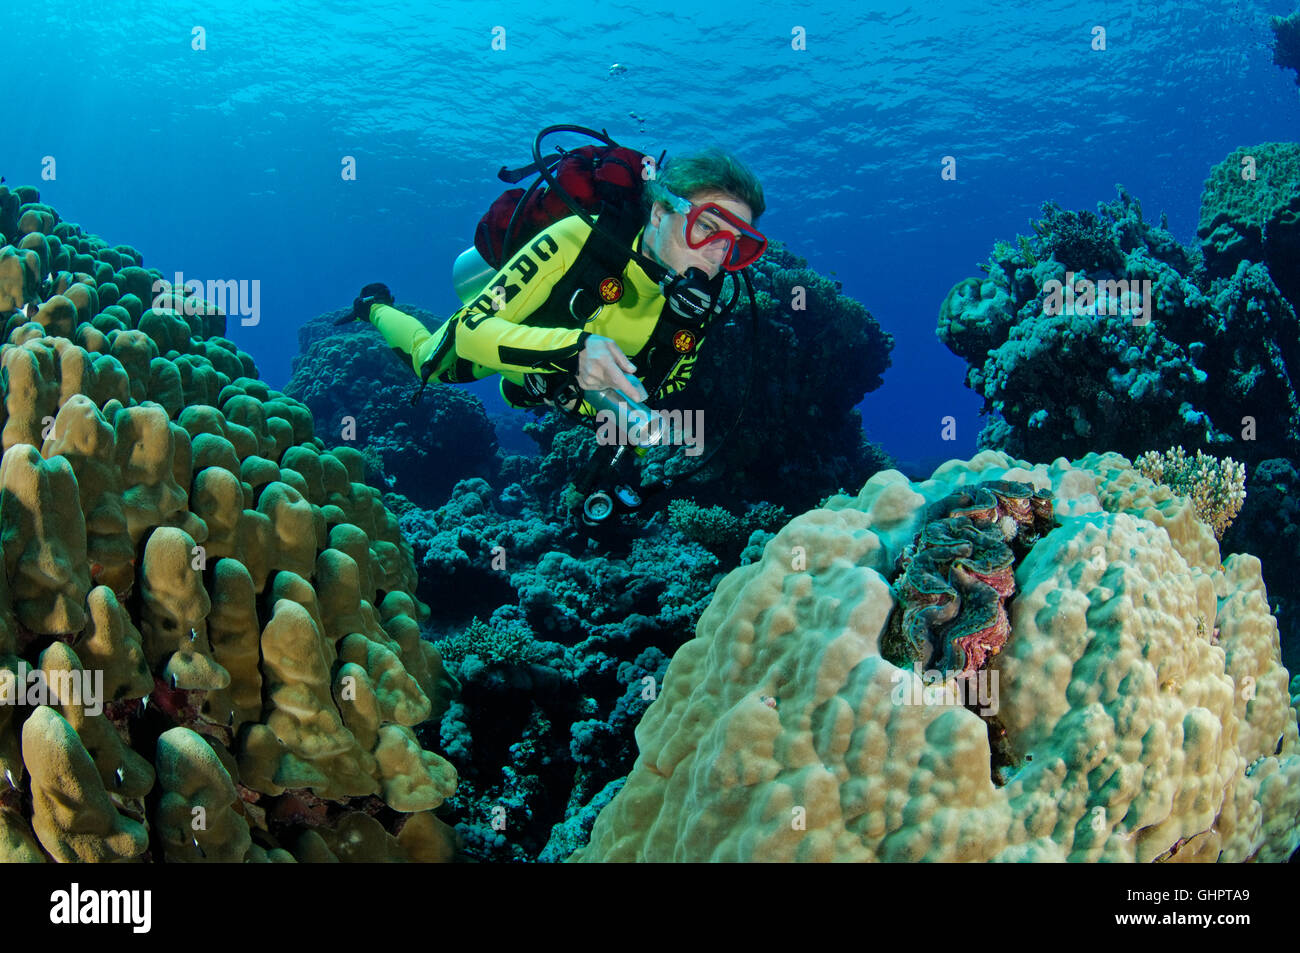 Porites sp., Coralreef with Hardcoral, Stony Coral and scuba diver, Zabargad Reef, El Gubal, Red Sea, Egypt, Africa Stock Photo